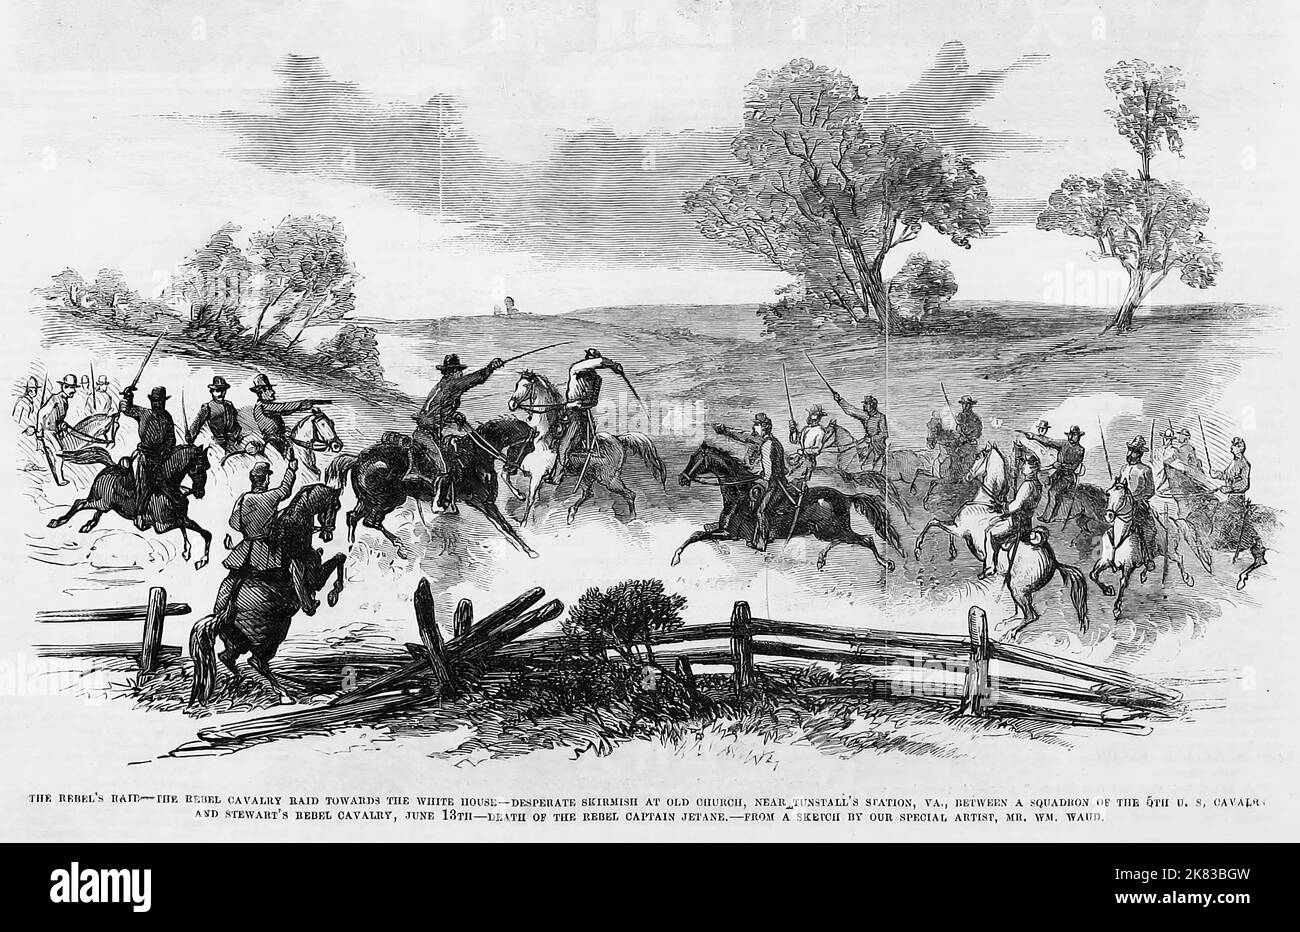 The Rebel's Raid - The Rebel cavalry raid towards the White House (plantation) - Desperate skirmish at Old Church, near Turnstall's Station, Virginia, between a squadron of the 5th U.S. cavalry and J. E. B. Stewart's cavalry, June 13th, 1862 - Death of the Rebel Captain Jetane. 19th century American Civil War illustration from Frank Leslie's Illustrated Newspaper Stock Photo